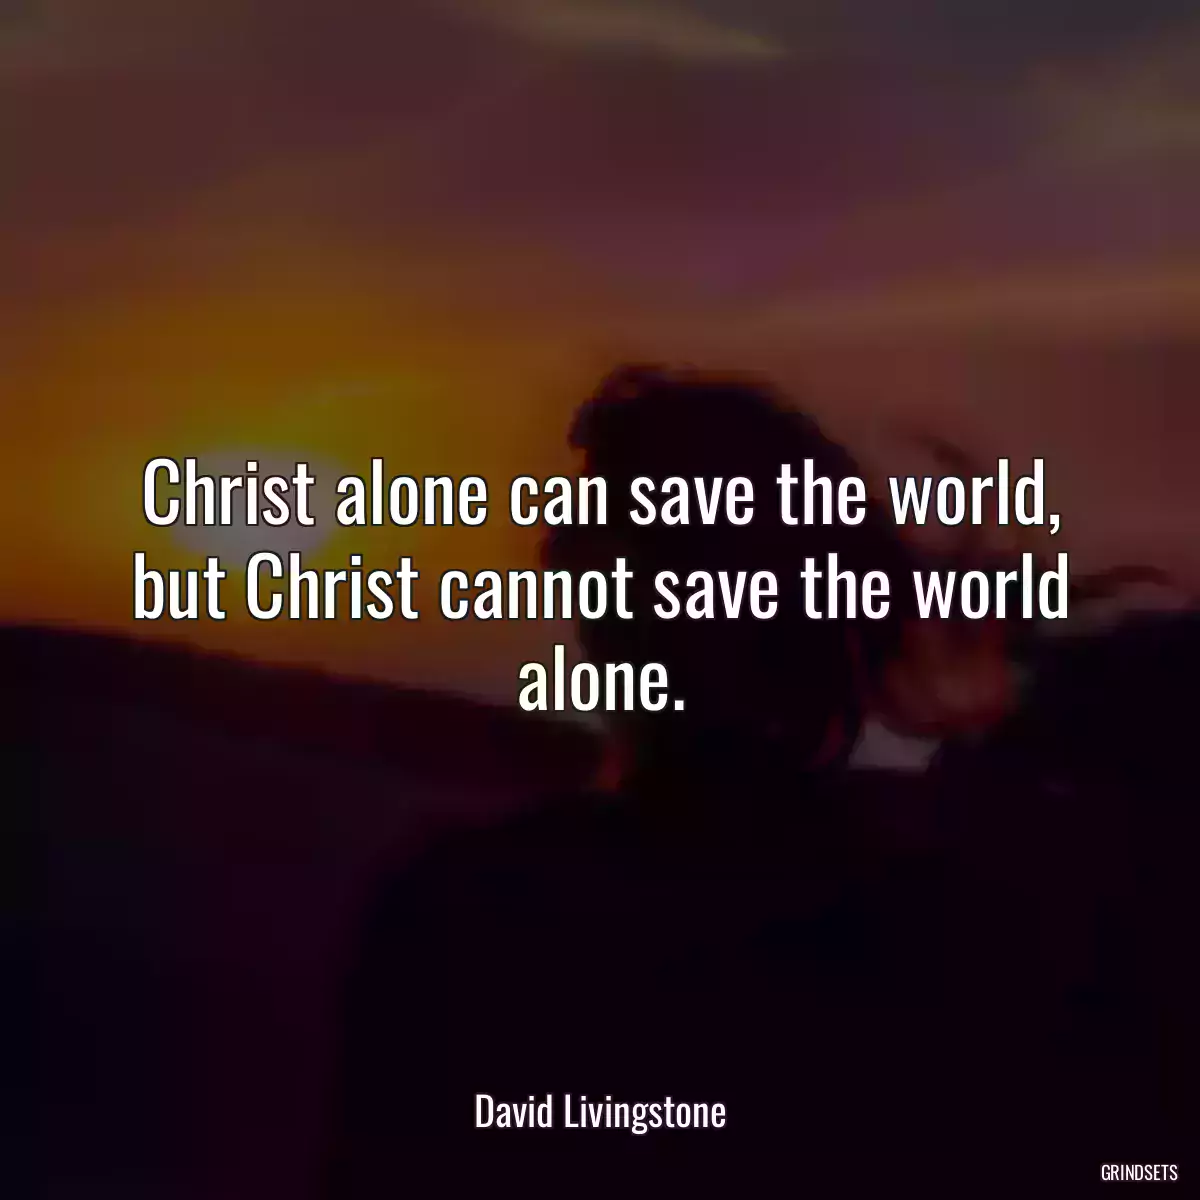 Christ alone can save the world, but Christ cannot save the world alone.